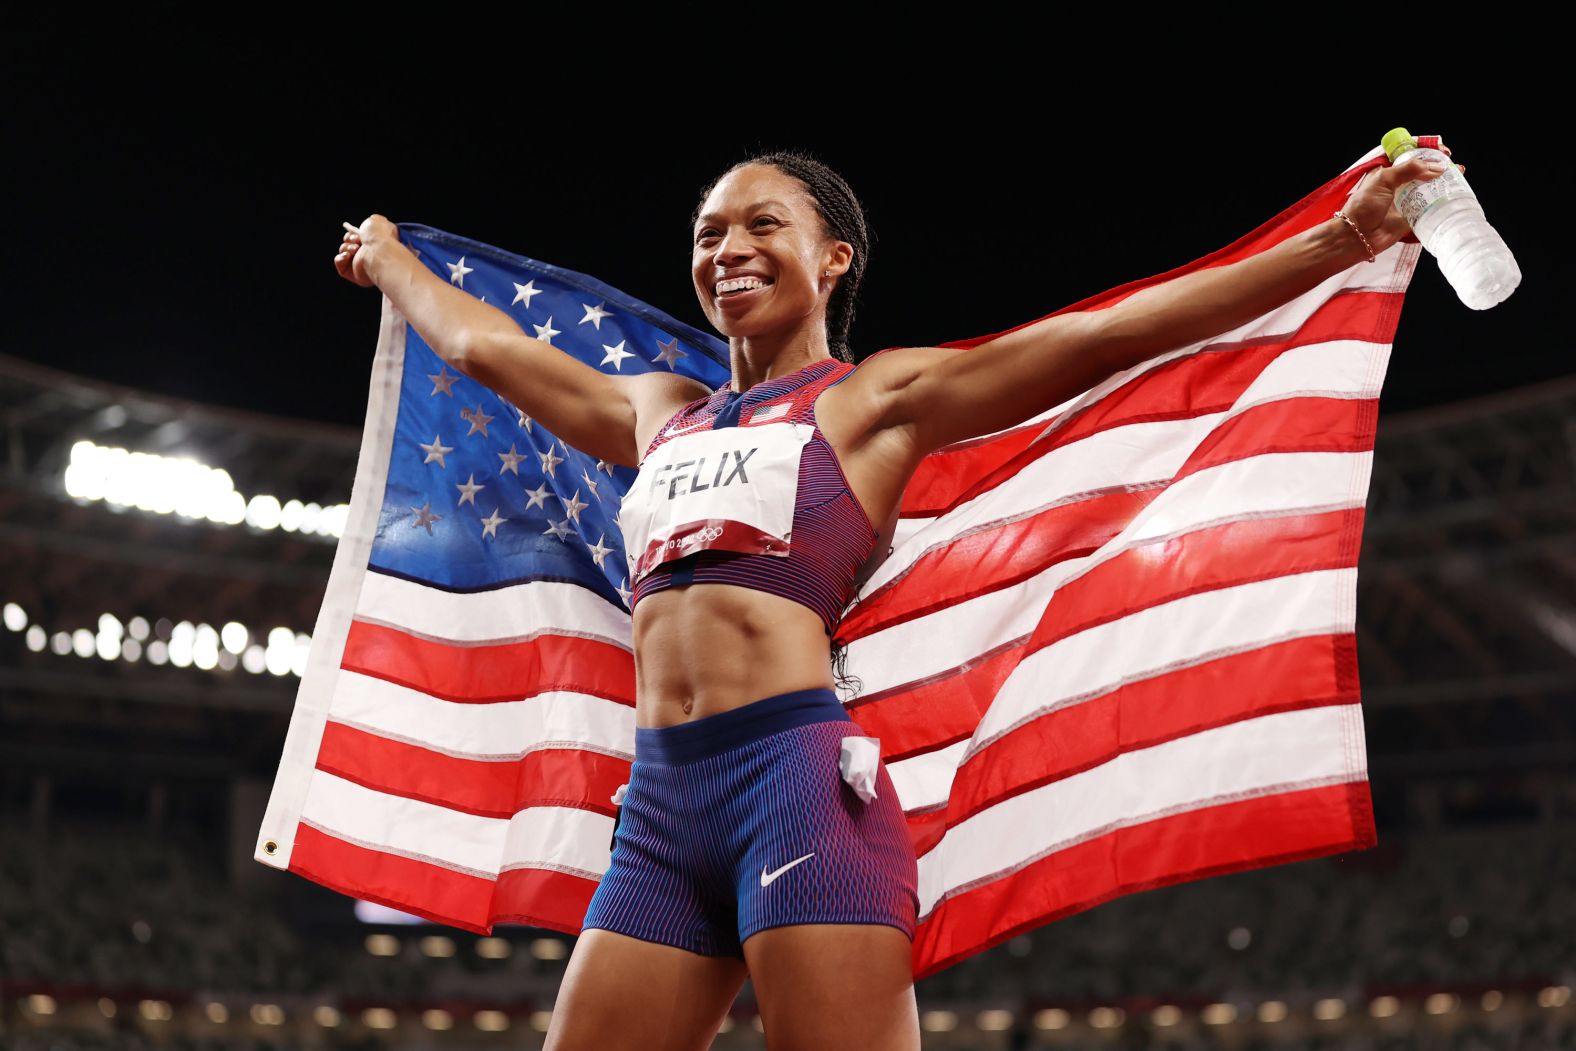 The United States' Allyson Felix celebrates after <a href="index.php?page=&url=https%3A%2F%2Fwww.cnn.com%2Fworld%2Flive-news%2Ftokyo-2020-olympics-08-06-21-spt%2Fh_c43d6f52d2aea0dc6f56d09020439a73" target="_blank">winning the bronze medal</a> in the 400 meters on August 6. She passed Jamaica's Merlene Ottey to become the most decorated woman in Olympic track-and-field history.